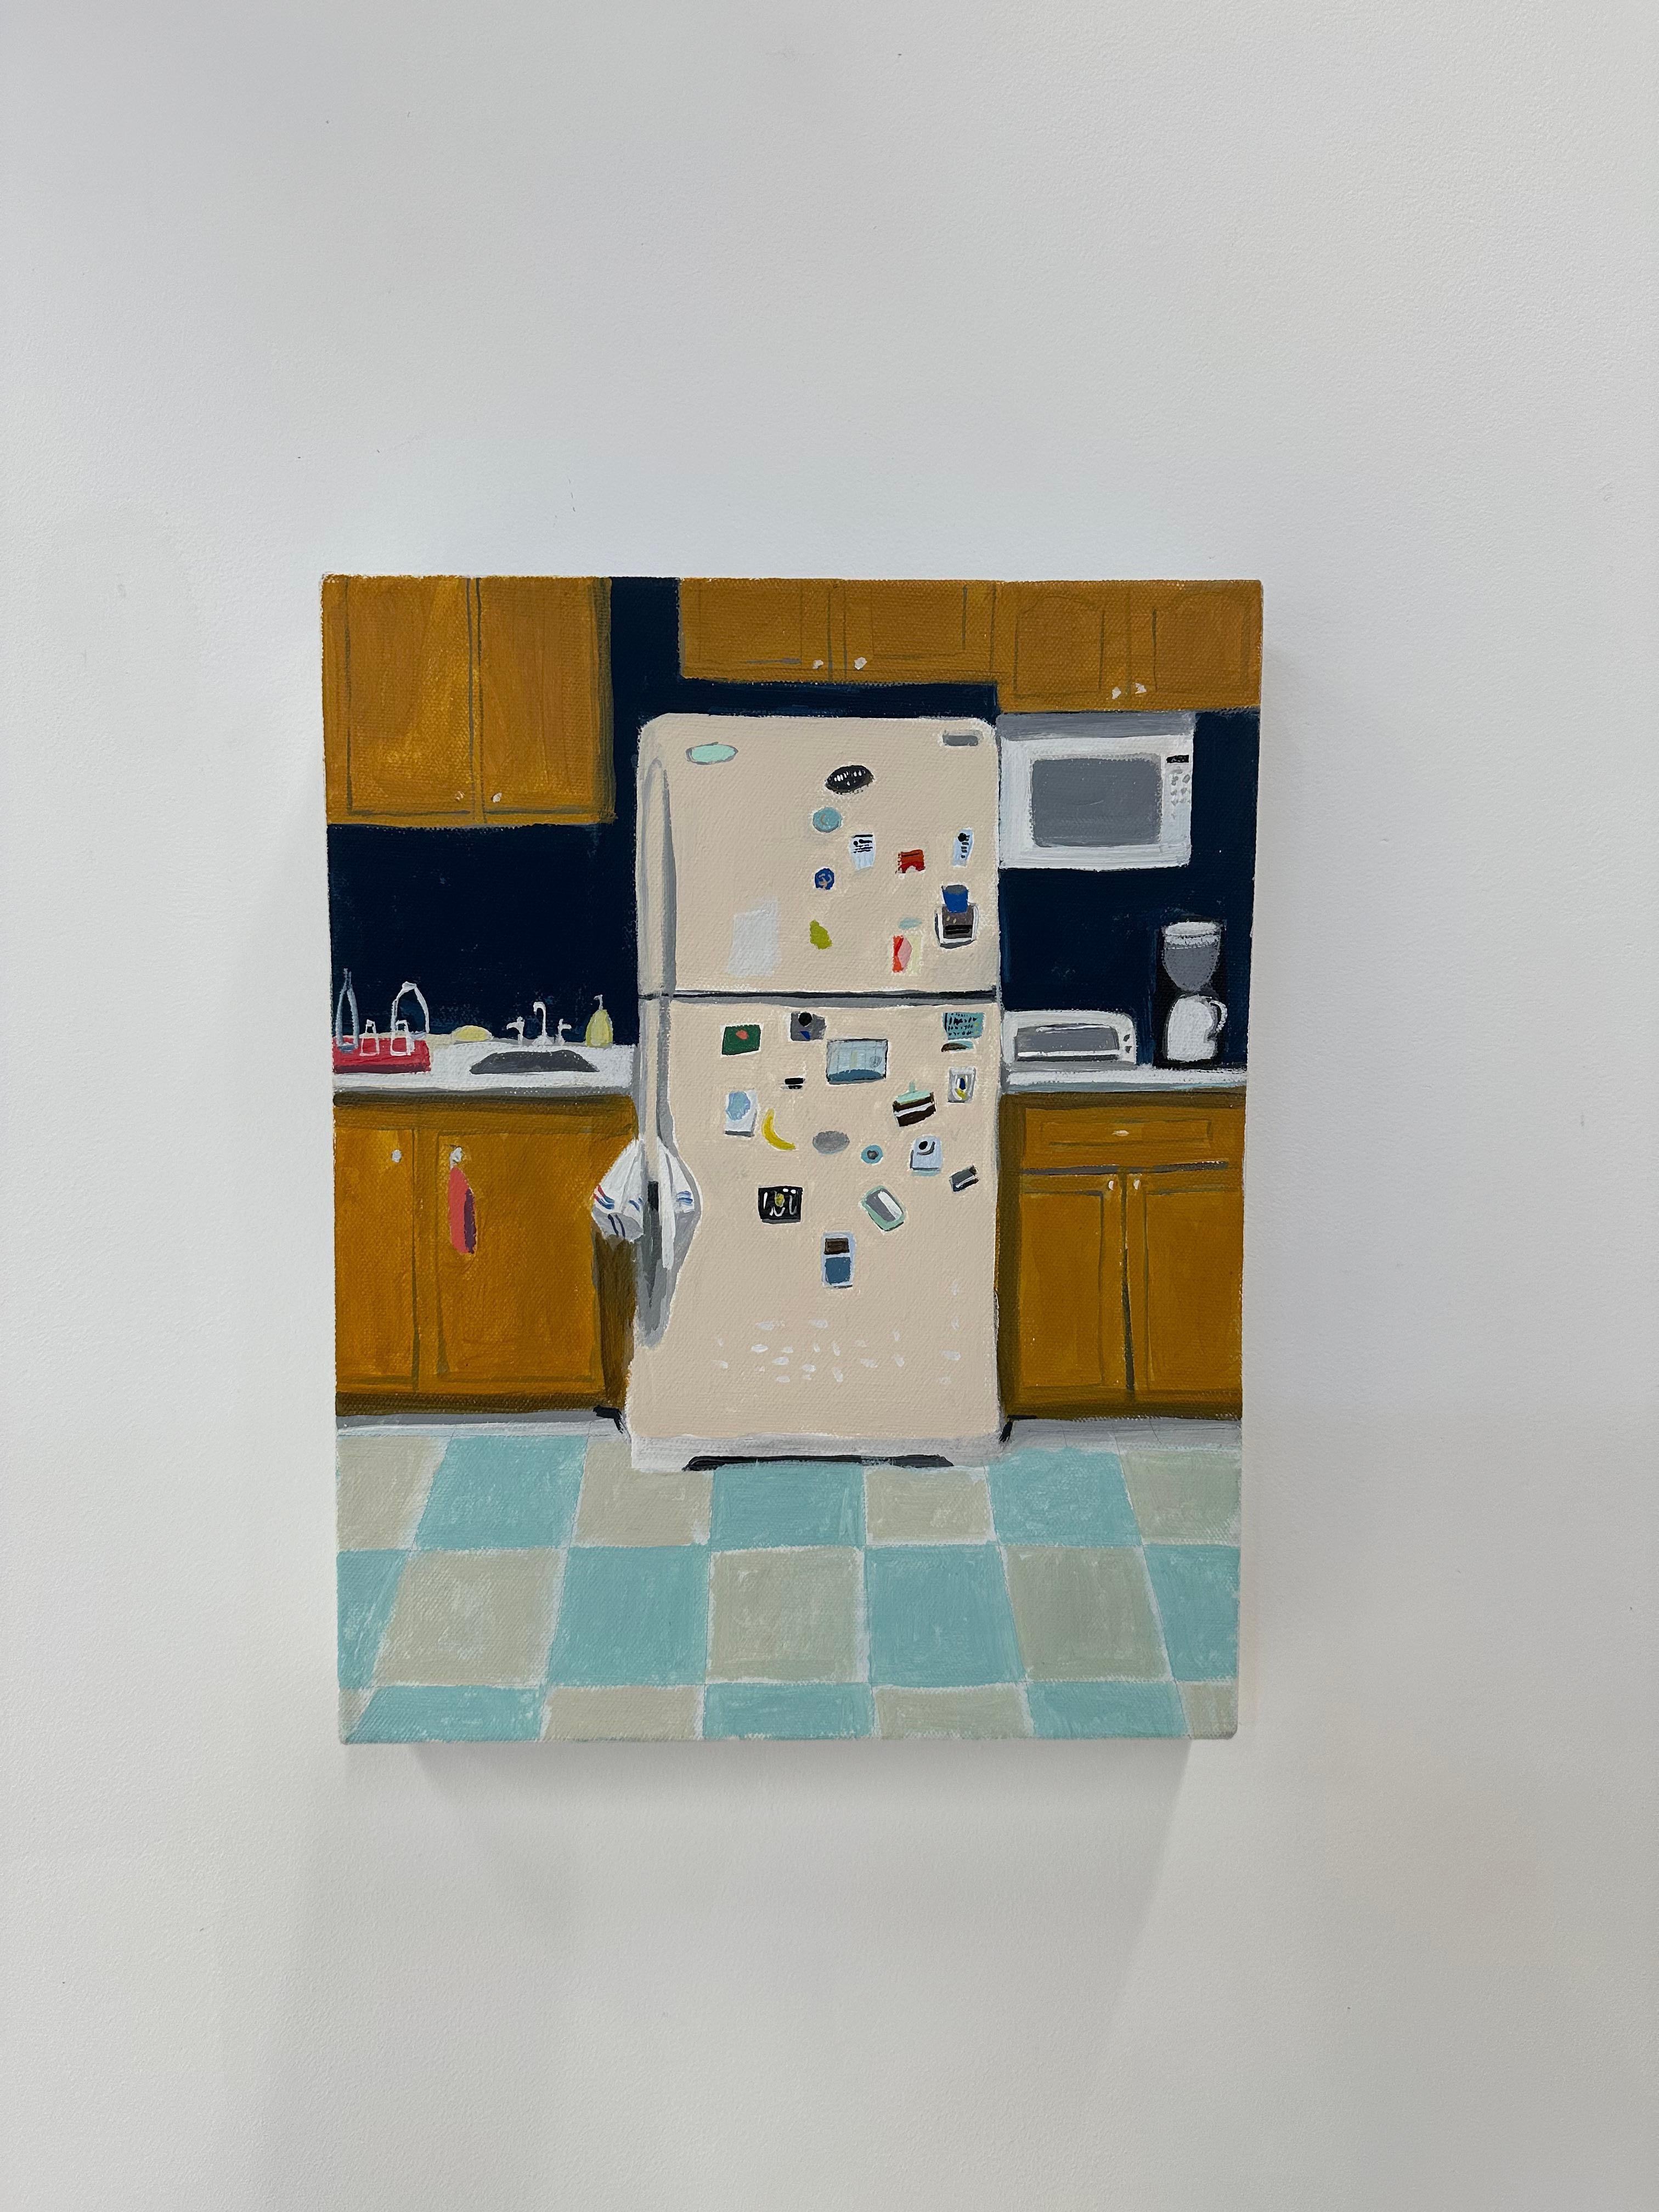 Peach Refrigerator, Kitchen Interior, Yellow Wooden Cabinets, Tiled Floor - Painting by Polly Shindler